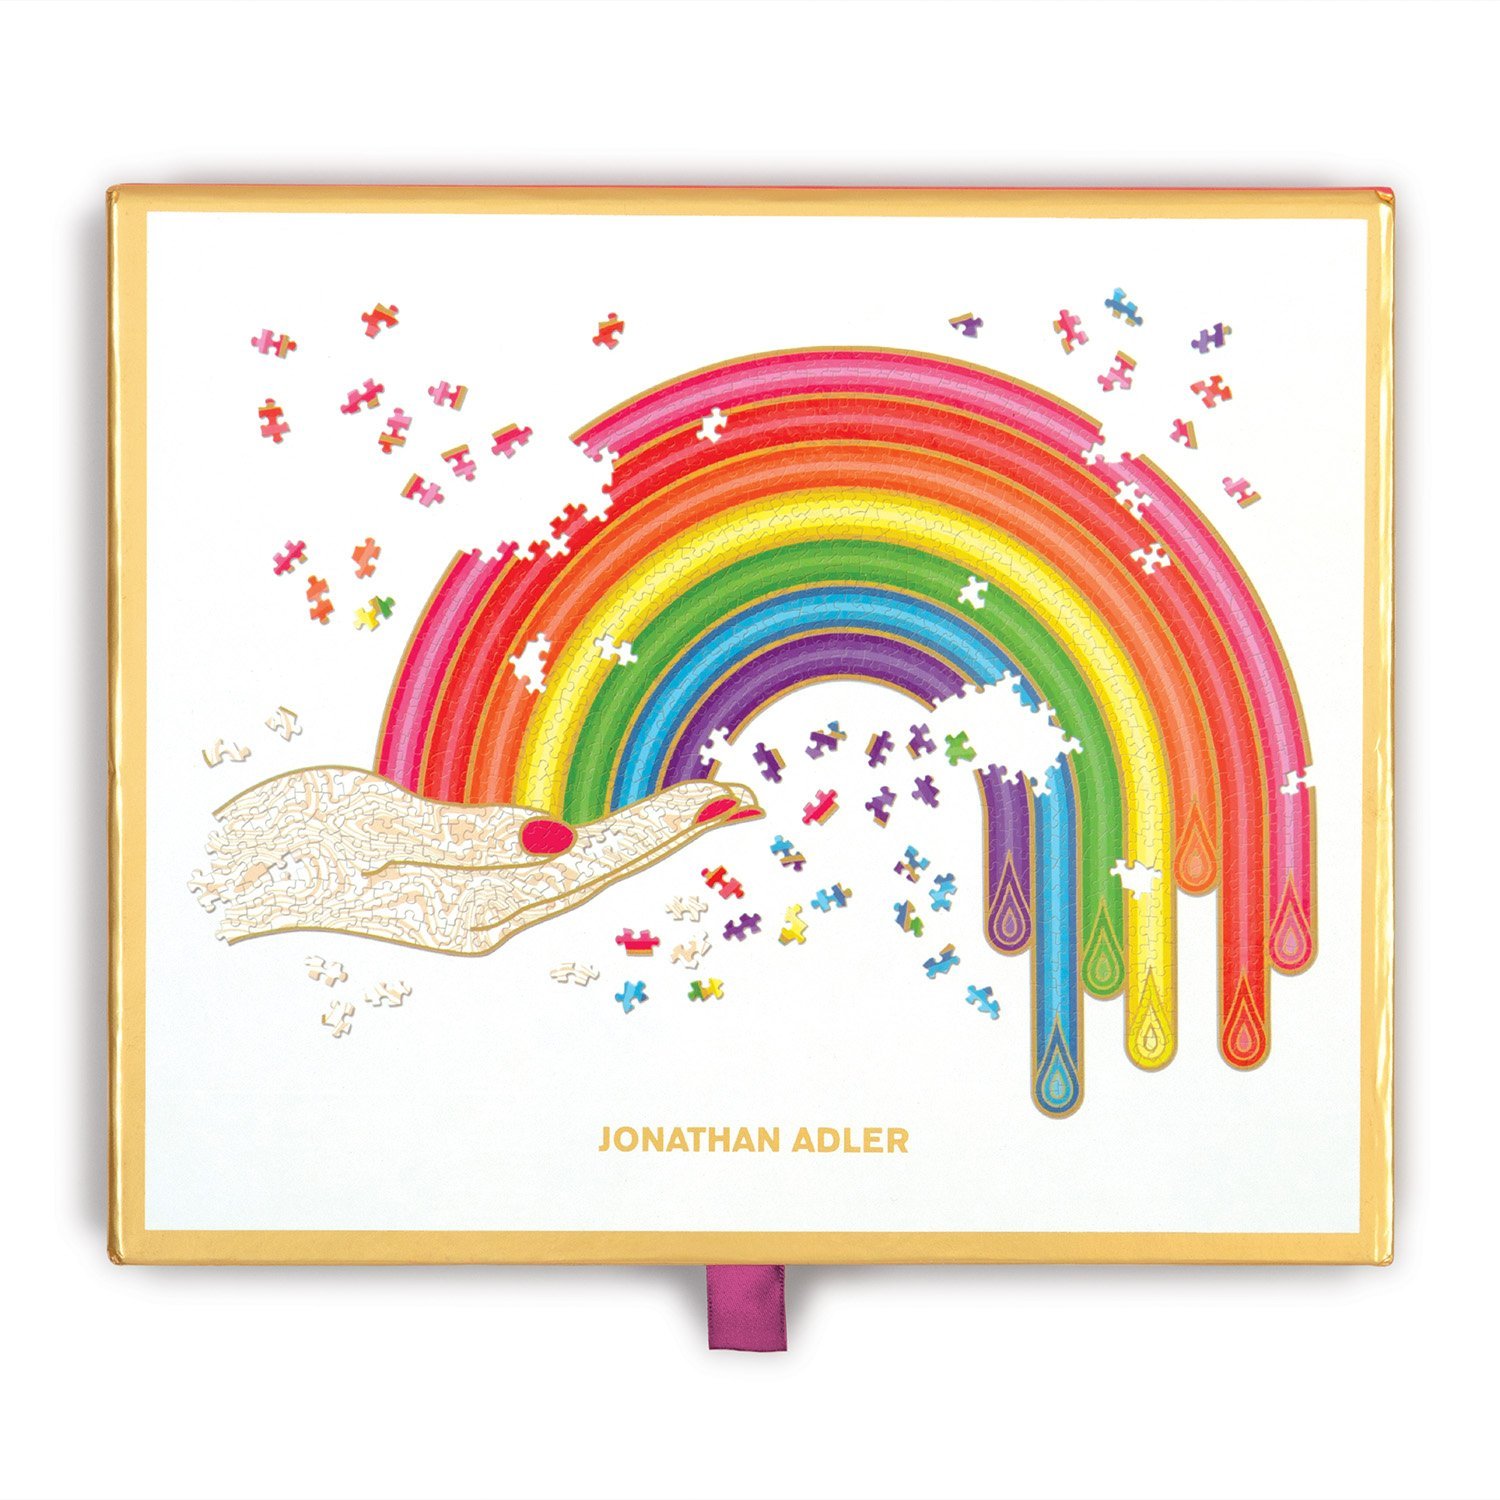 Jonathan Adler Rainbow Hand 750 Piece Shaped Puzzle (Other) - image 4 of 4